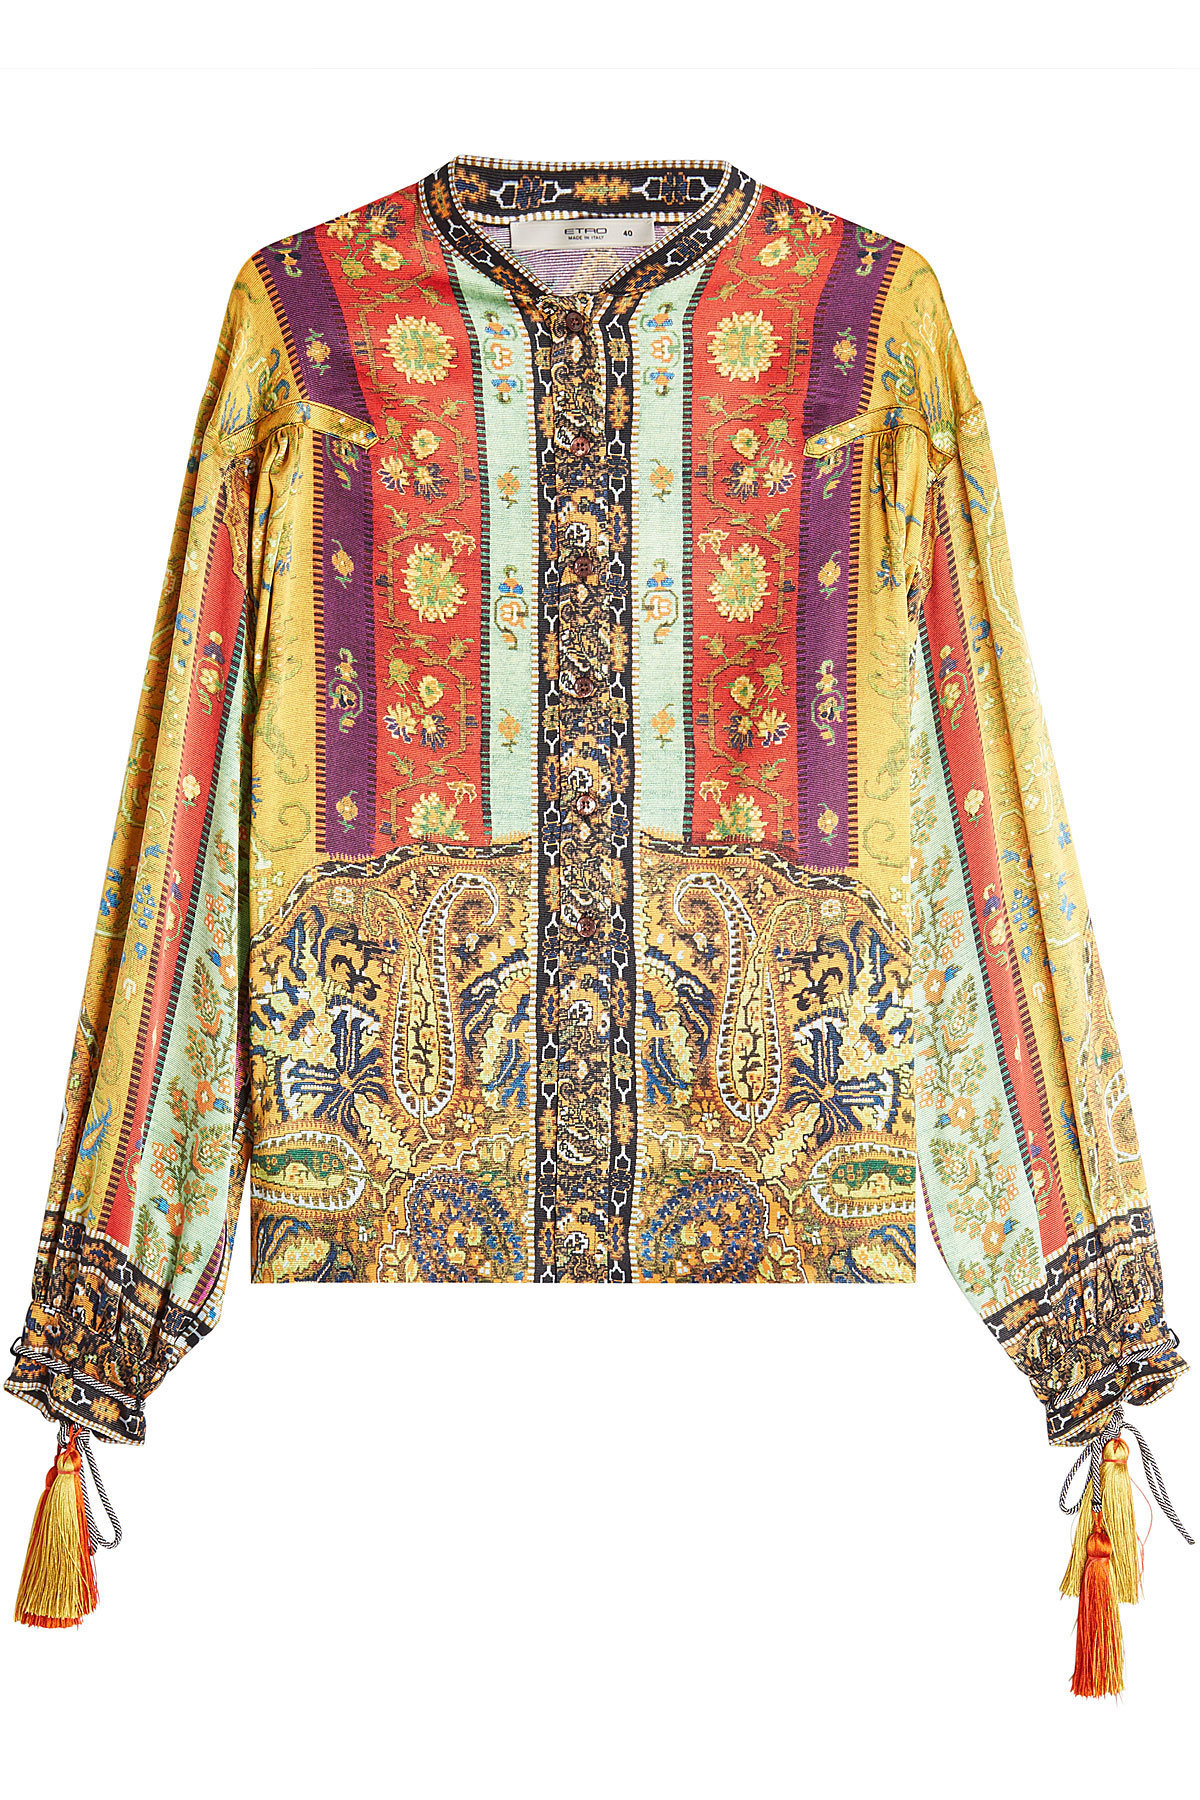 Etro - Printed Silk Blouse with Tassels